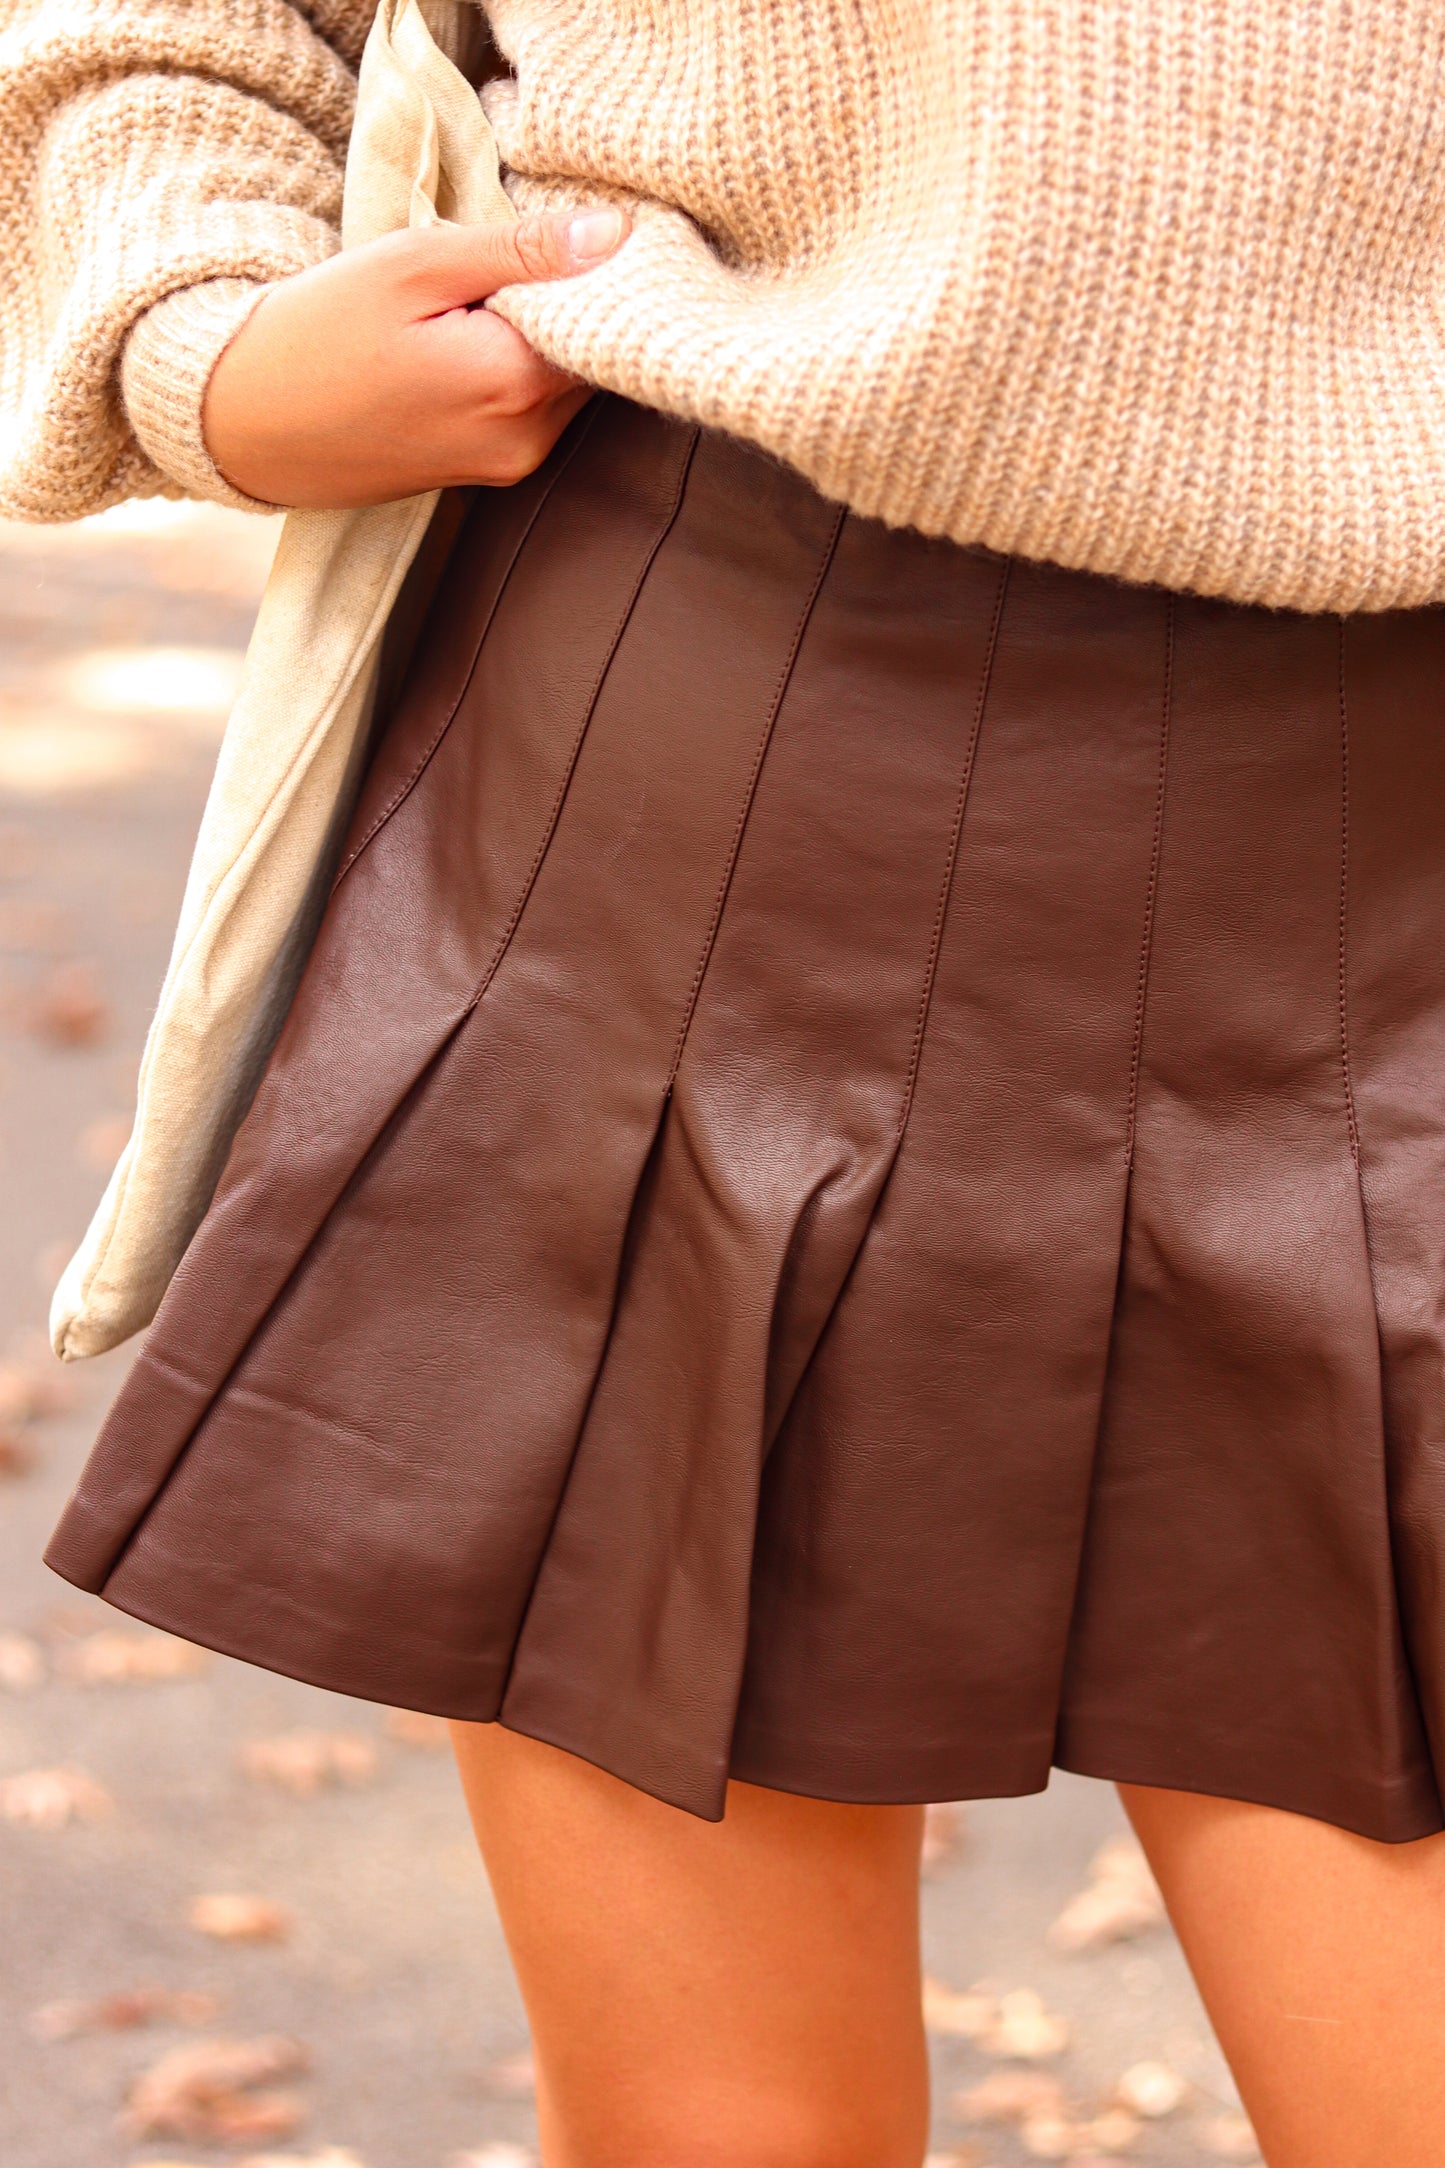 Fall in the City Skirt